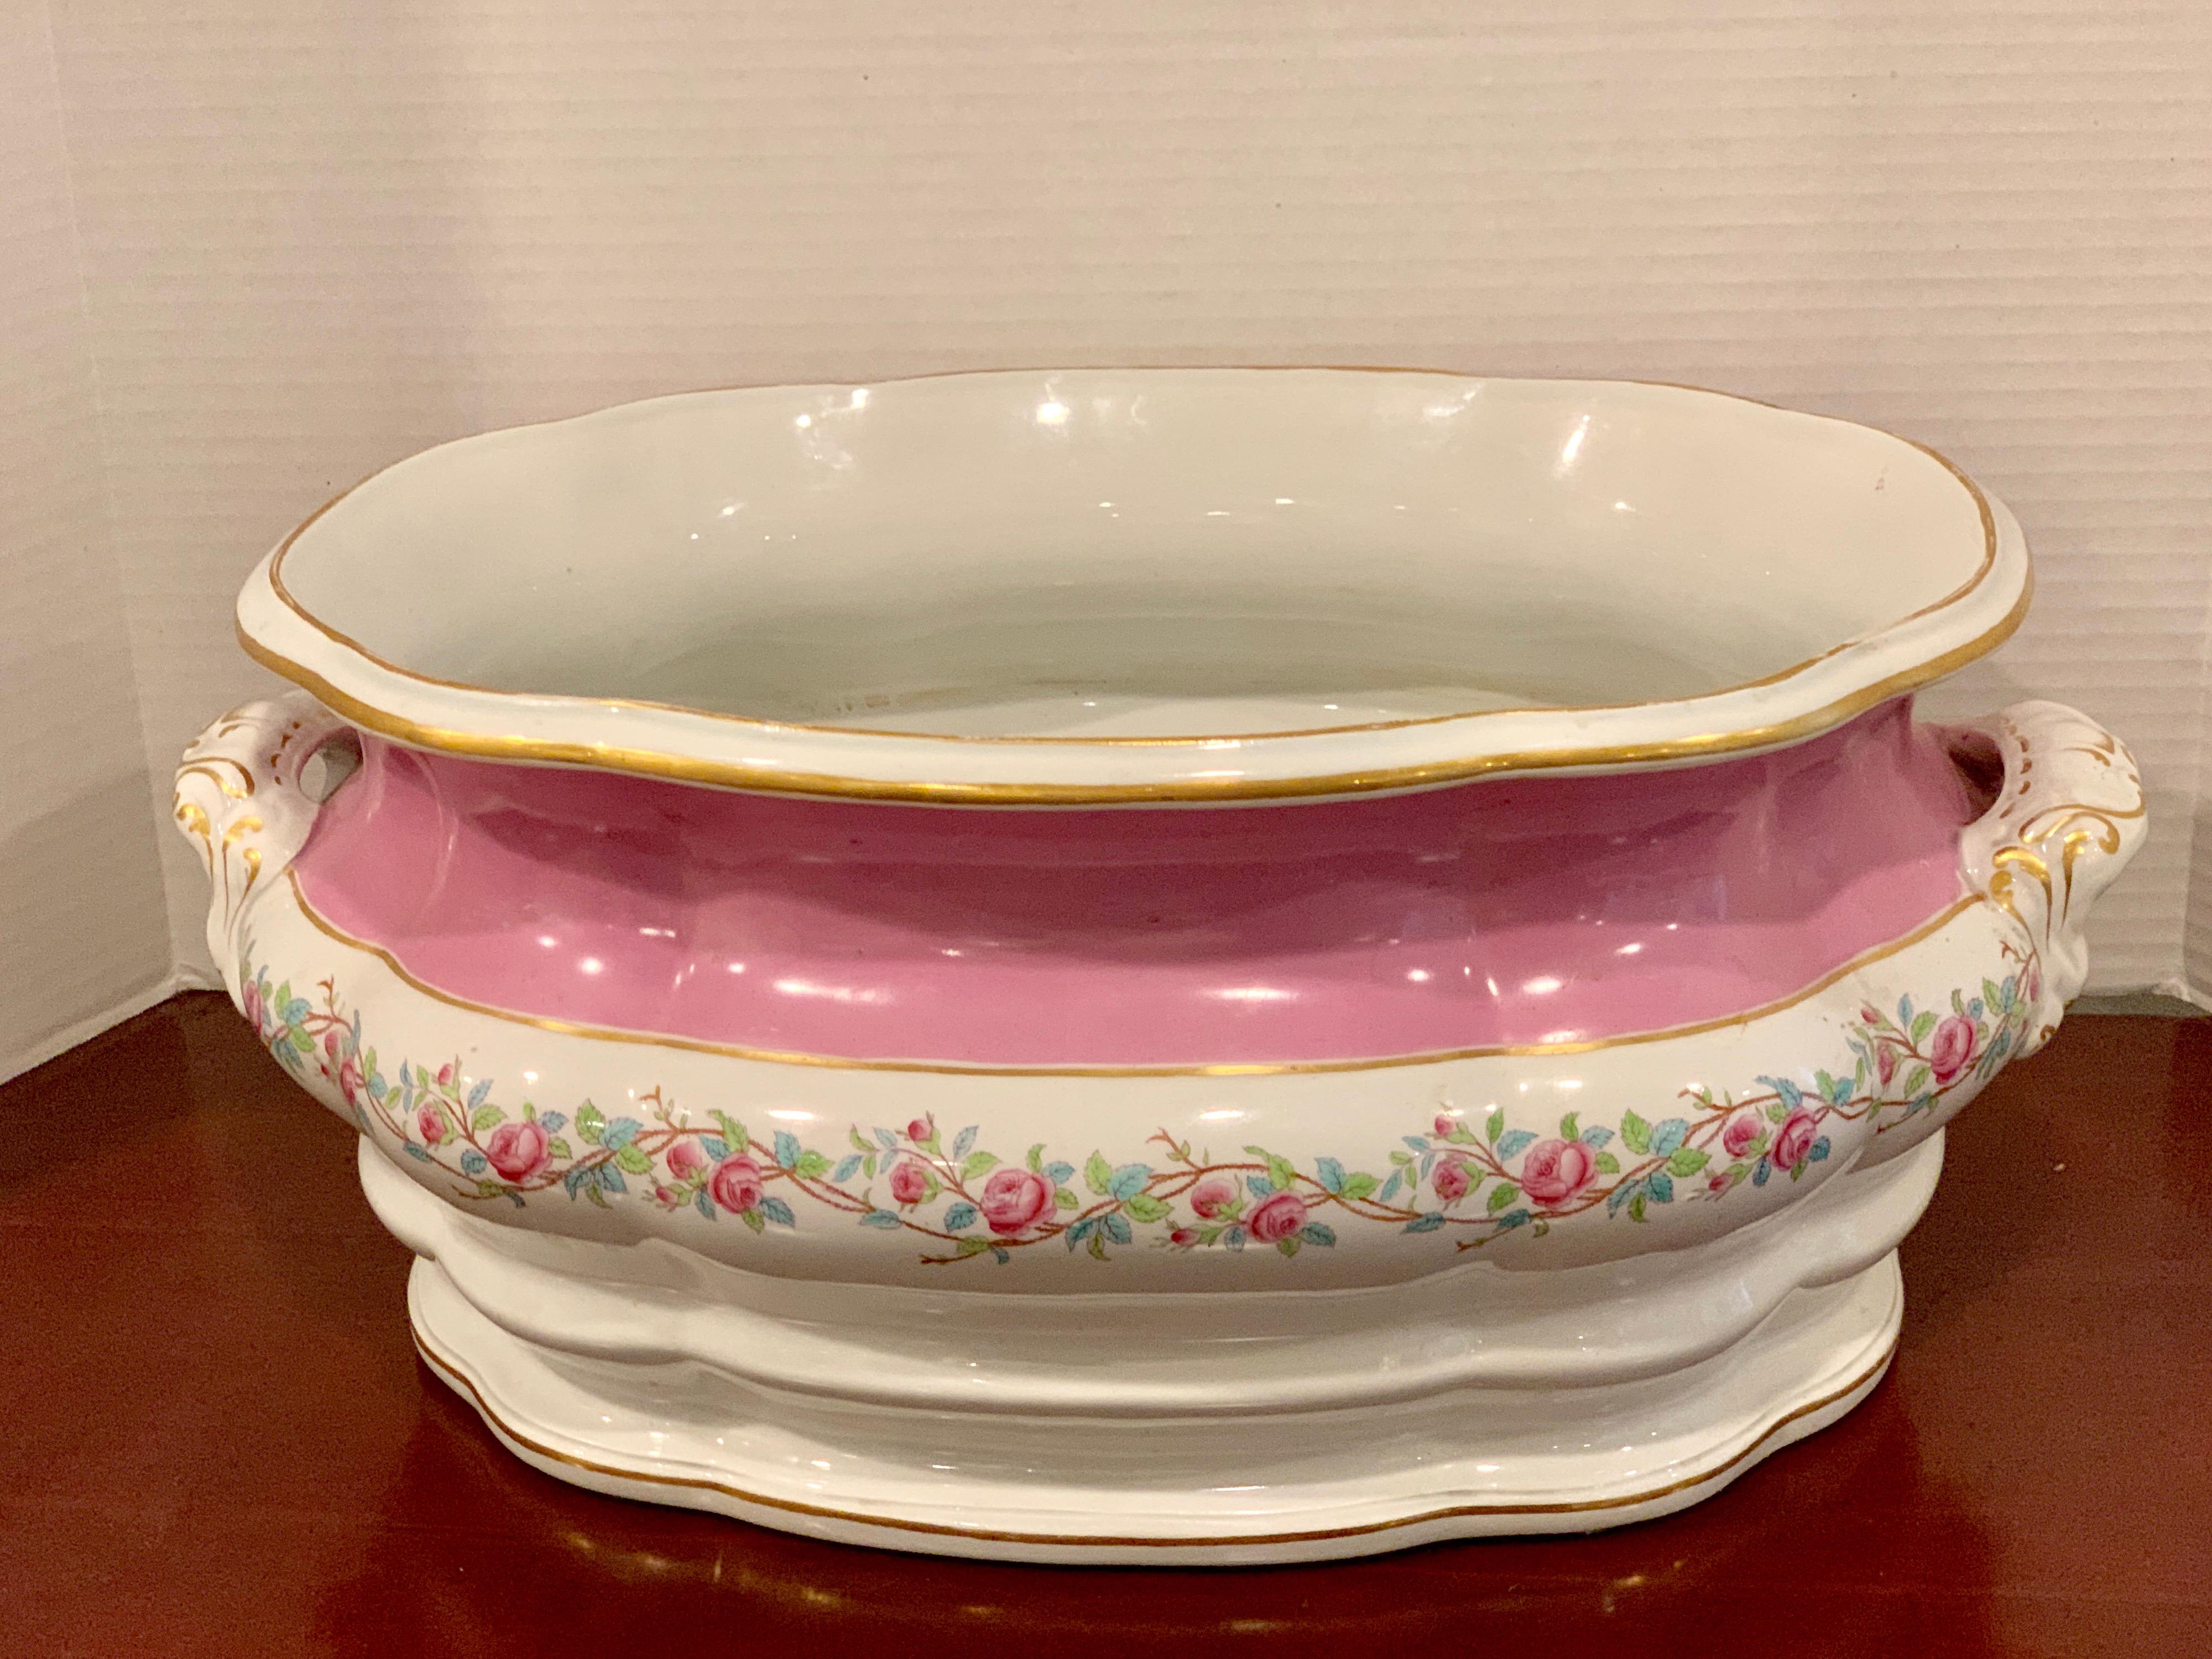 19th Century Pink Floral Porcelain Foot Bath, Attributed to Mintons For Sale 5